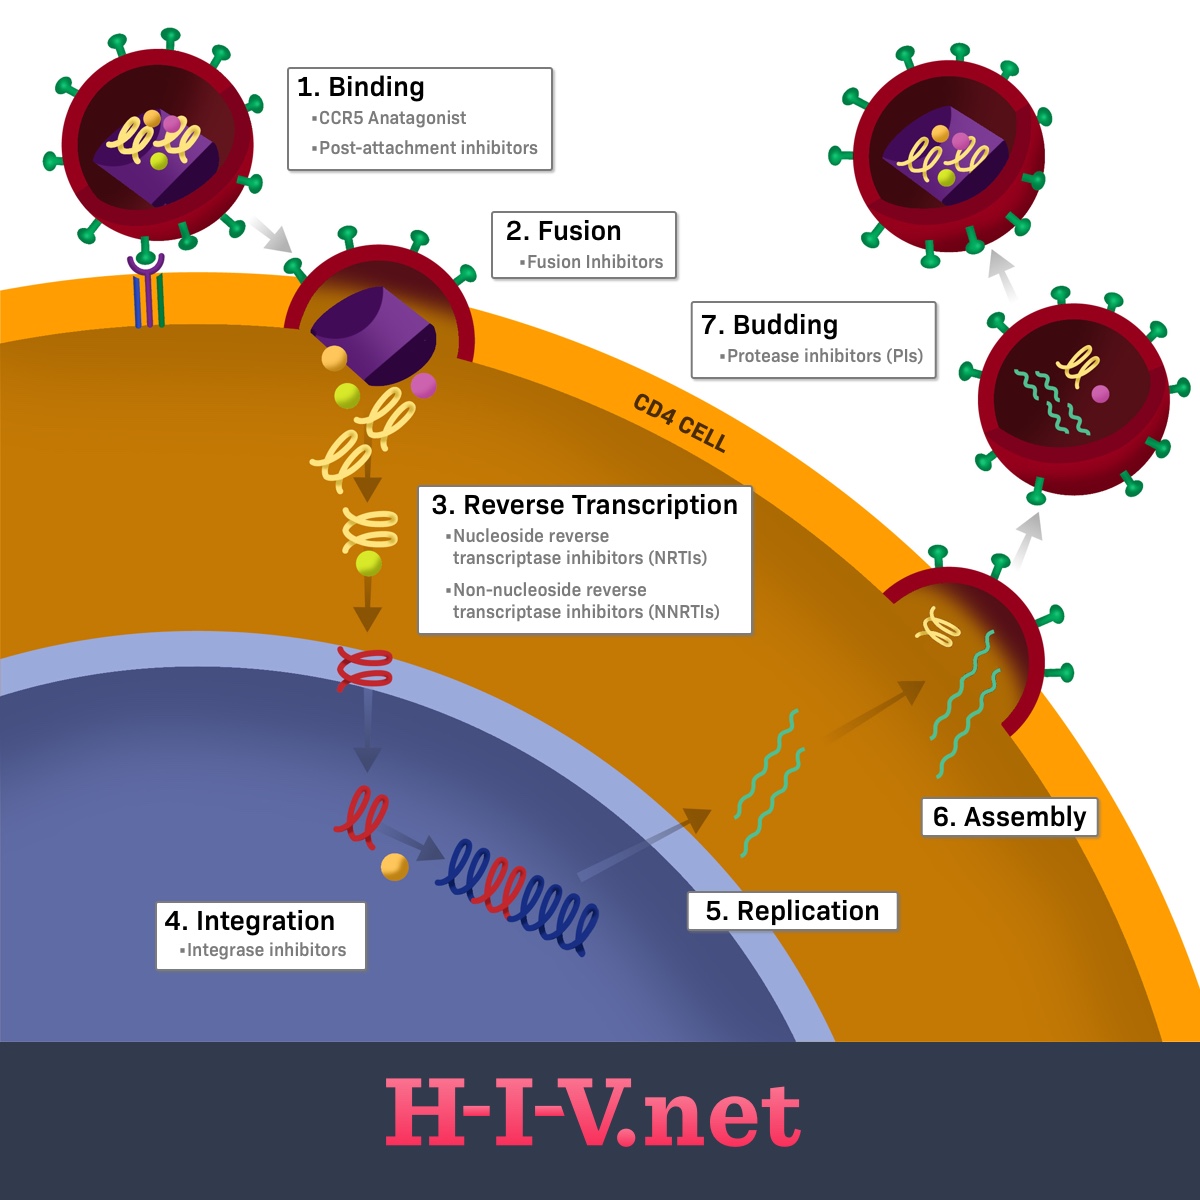 Where HIV drug classes target the HIV life cycle including binding, fusion, reverse transcription, integration, replication, assembly, and budding